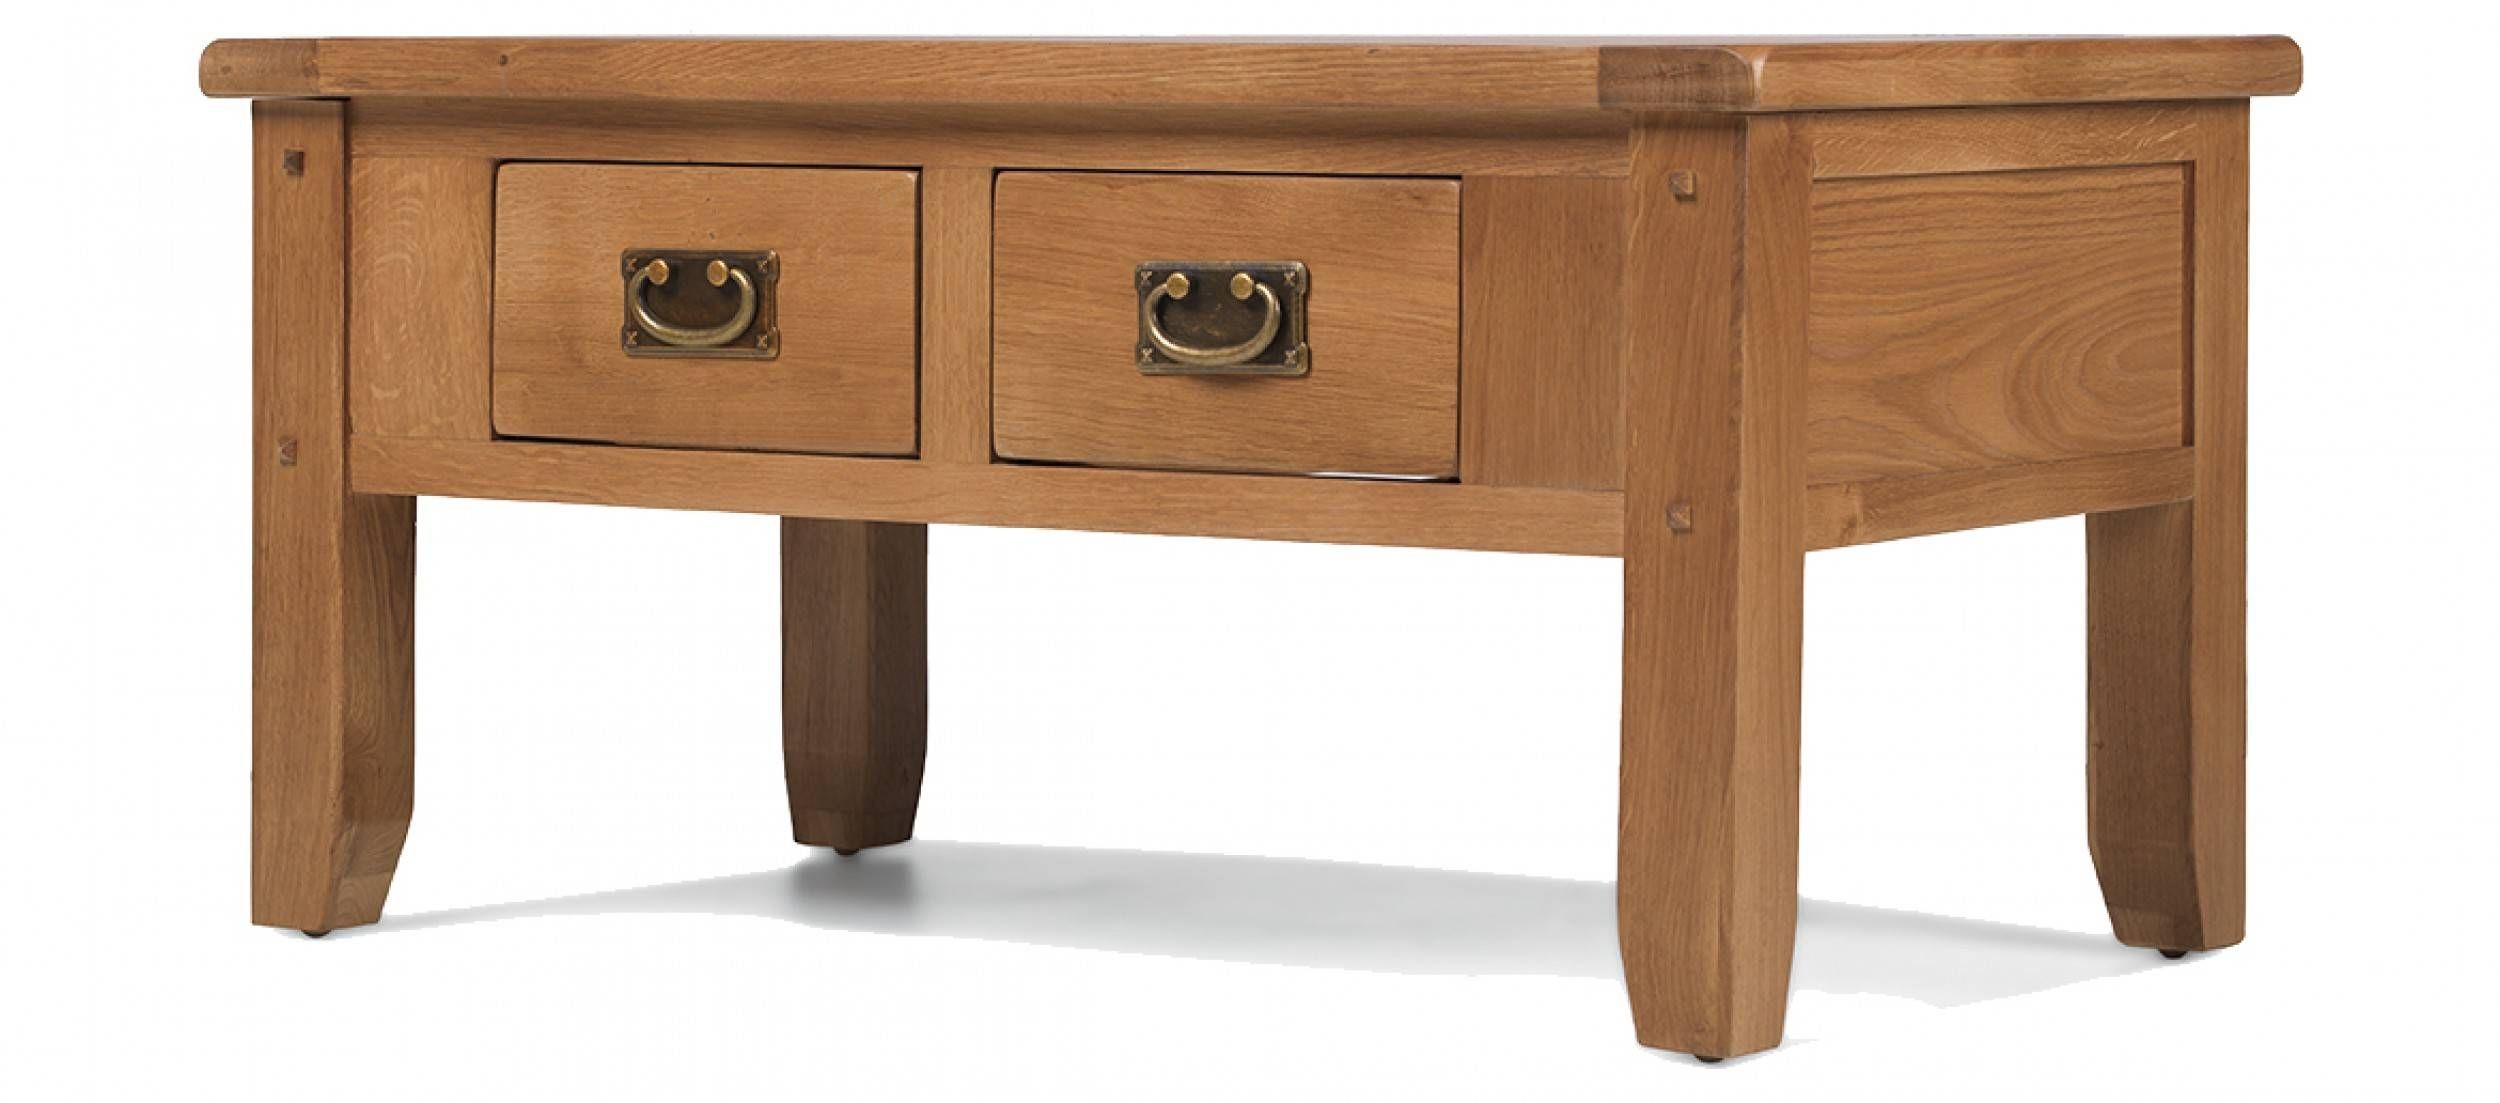 Rustic Oak Small 2 Drawer Coffee Table | Quercus Living For Rustic Oak Coffee Table With Drawers (View 3 of 15)